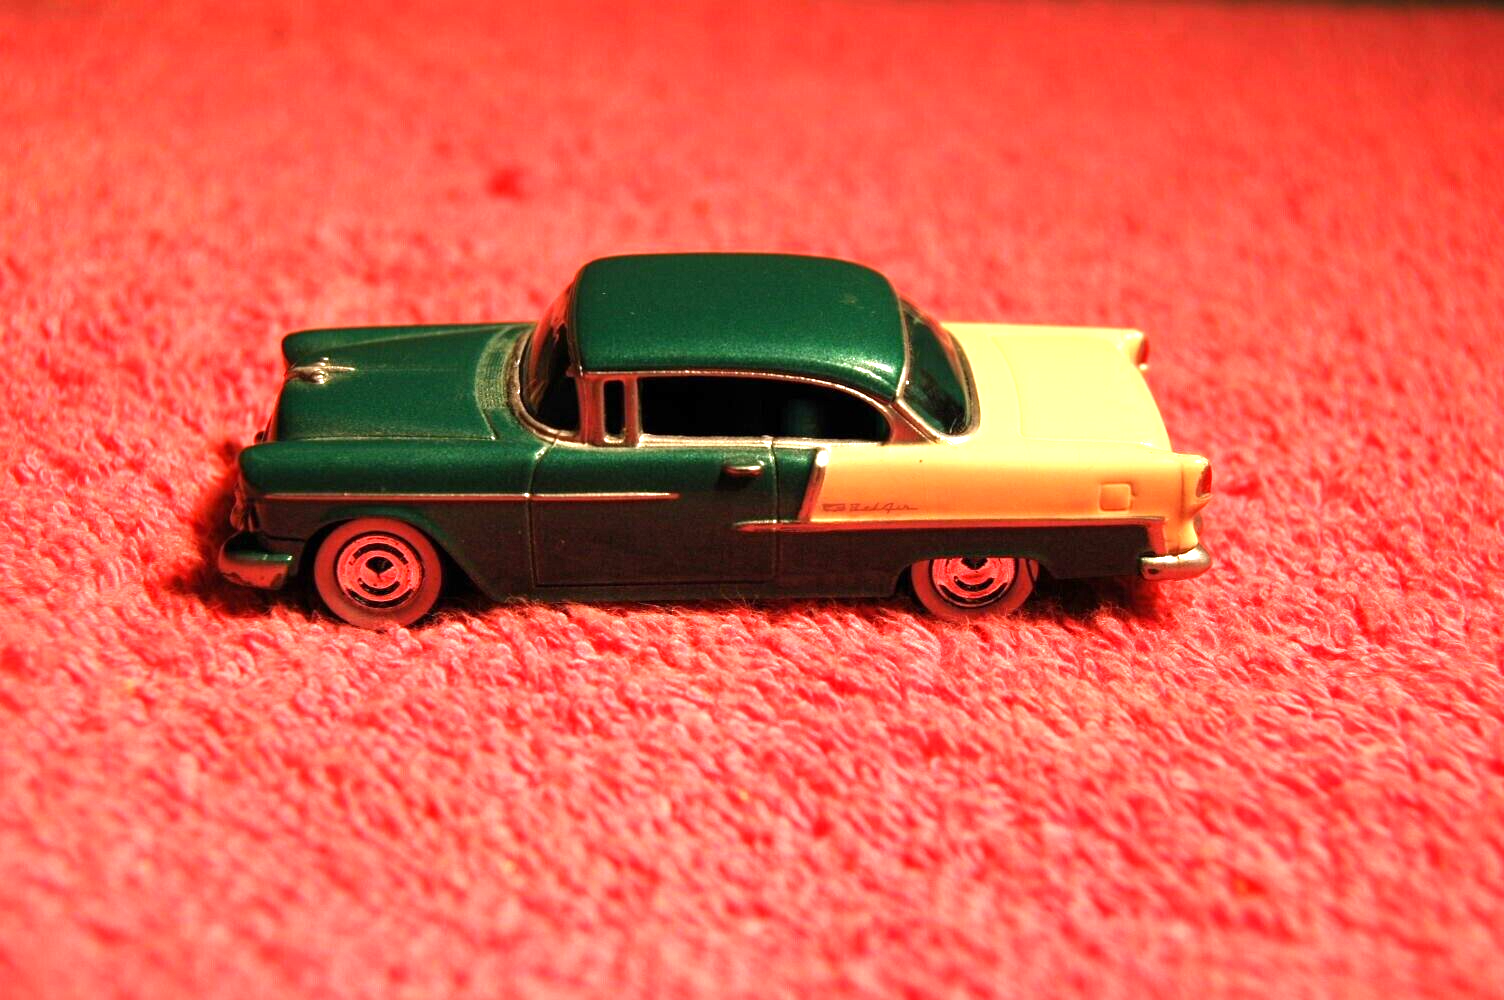 Primary image for High Speed Die Cast 1955 Chevrolet Bel Air HF-441 Nice Condition Toy Car